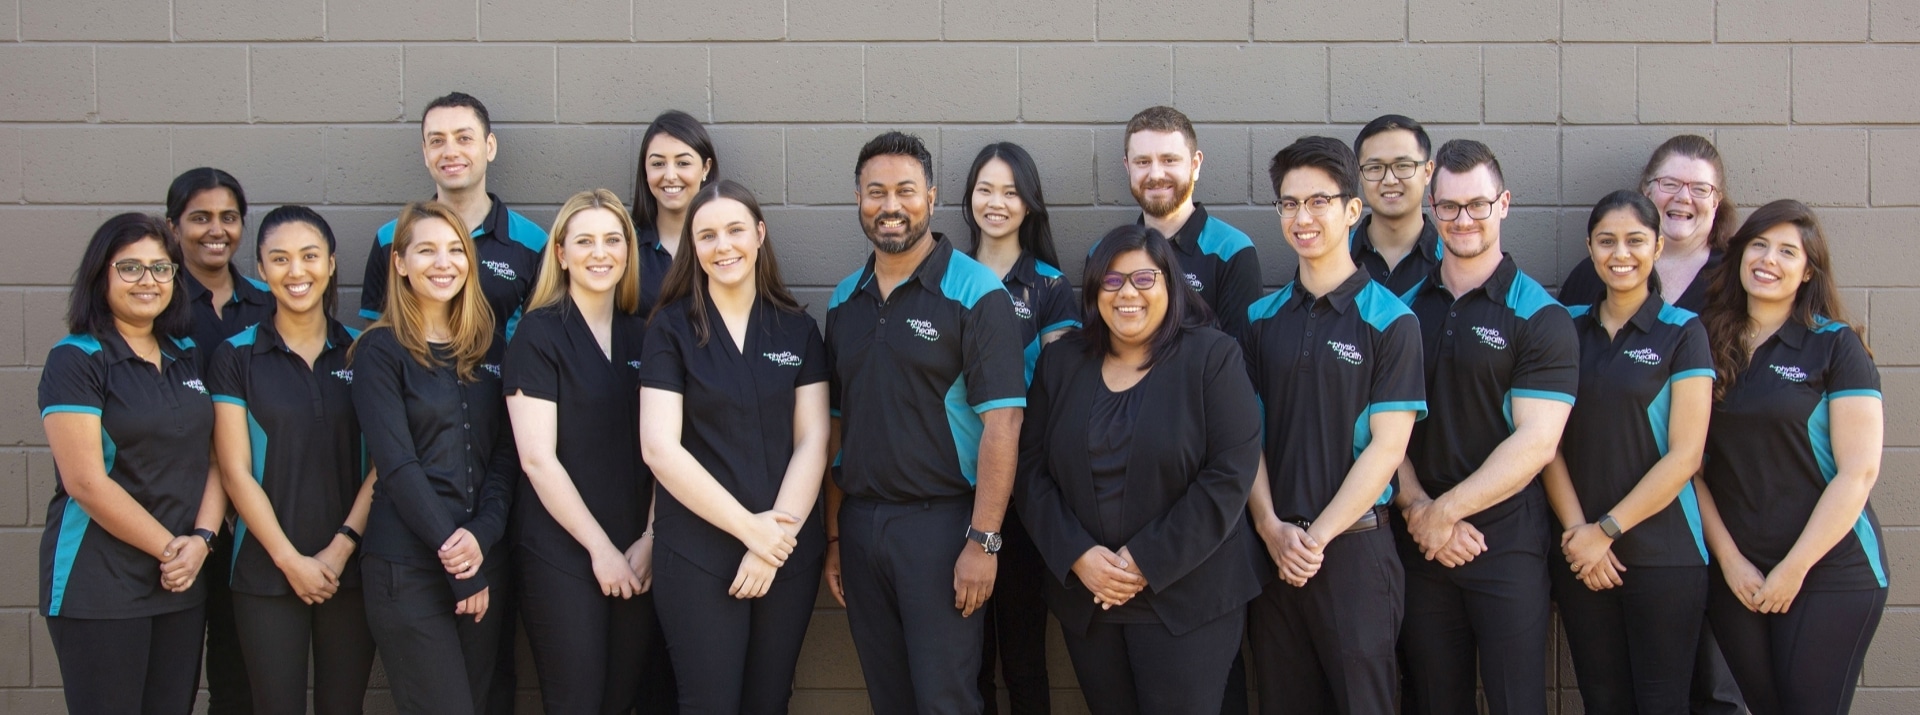 Trusted physiotherapy treatment with 4 clinics around Adelaide